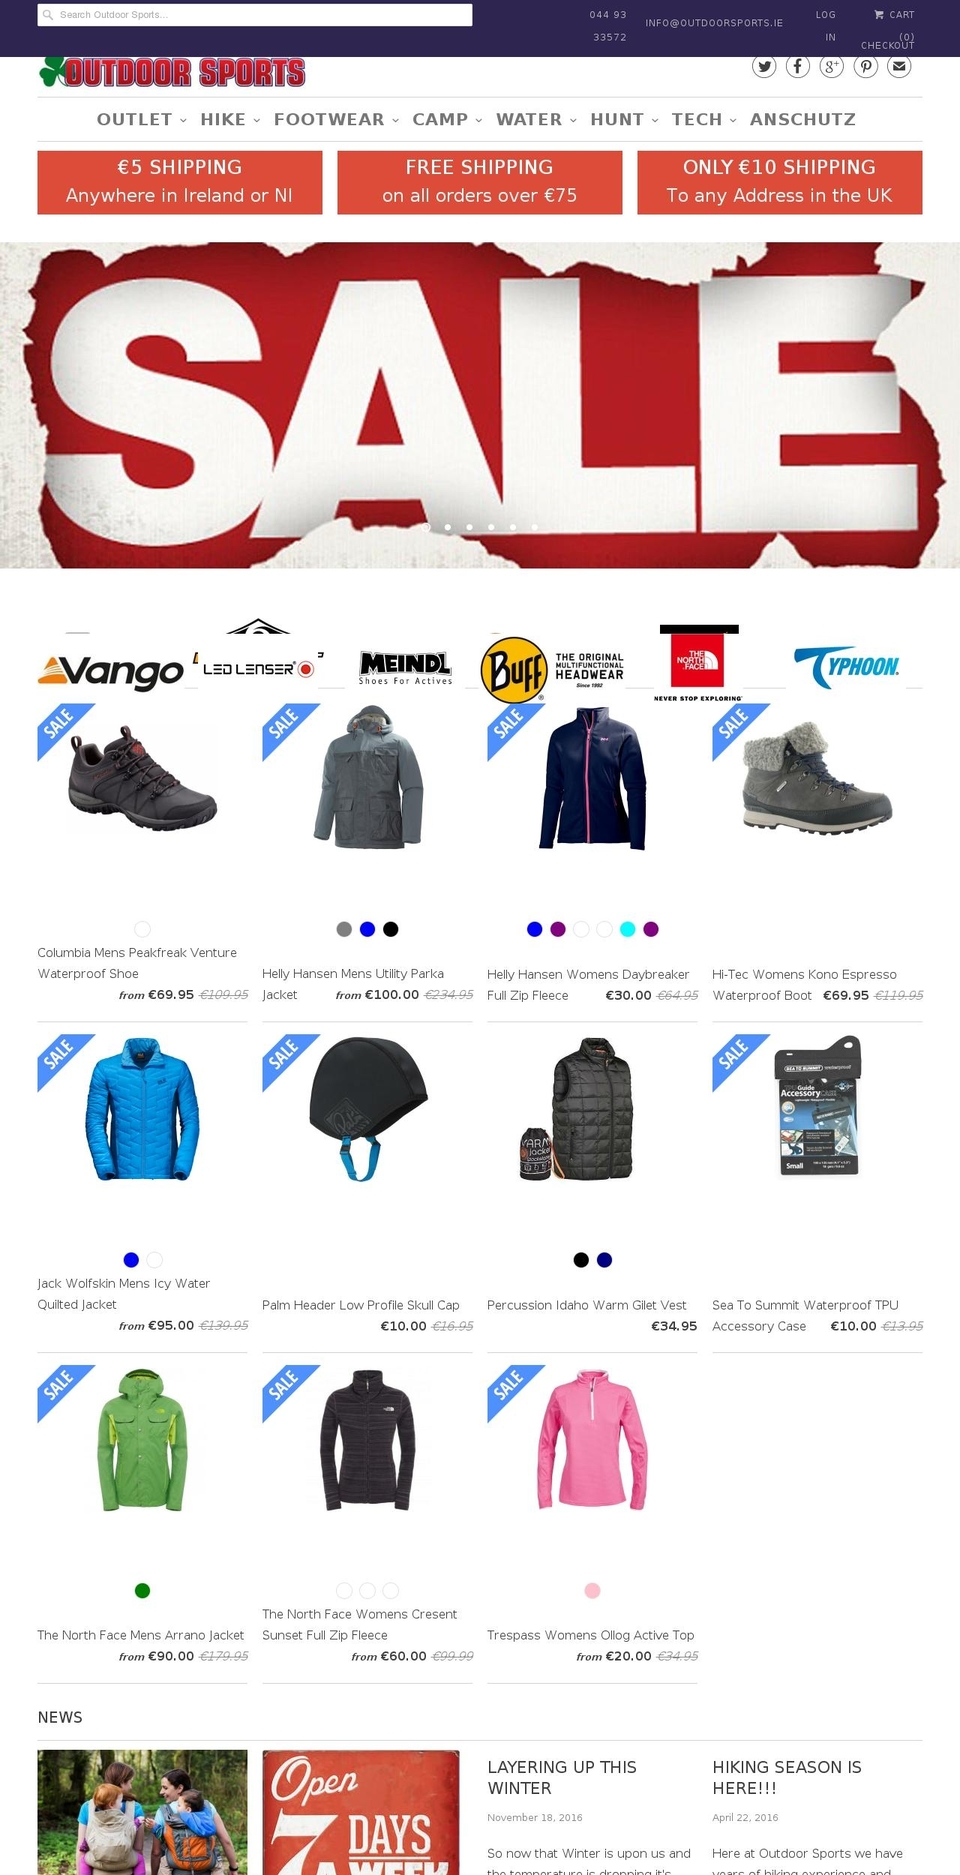 Sports Shopify theme site example outdoorsports.ie